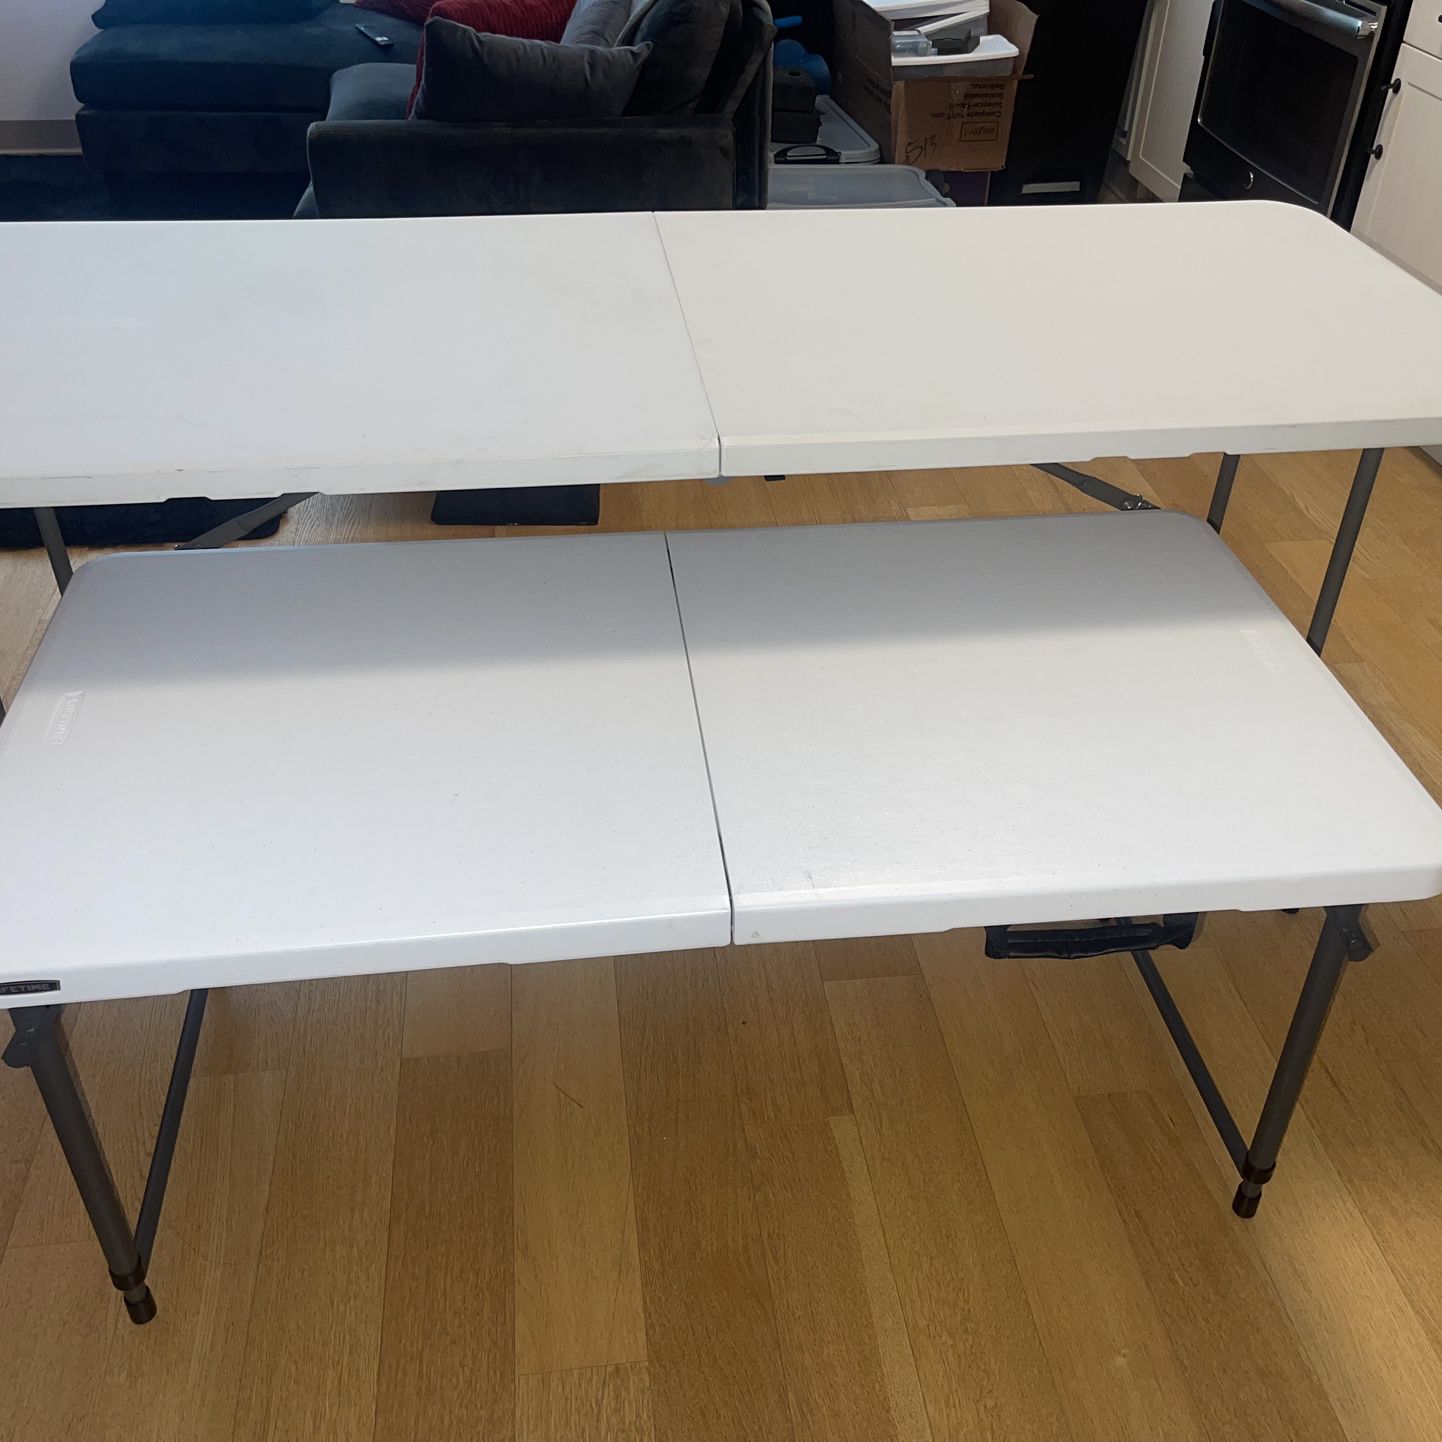 Portable Folding Tables (can sold separately or together)